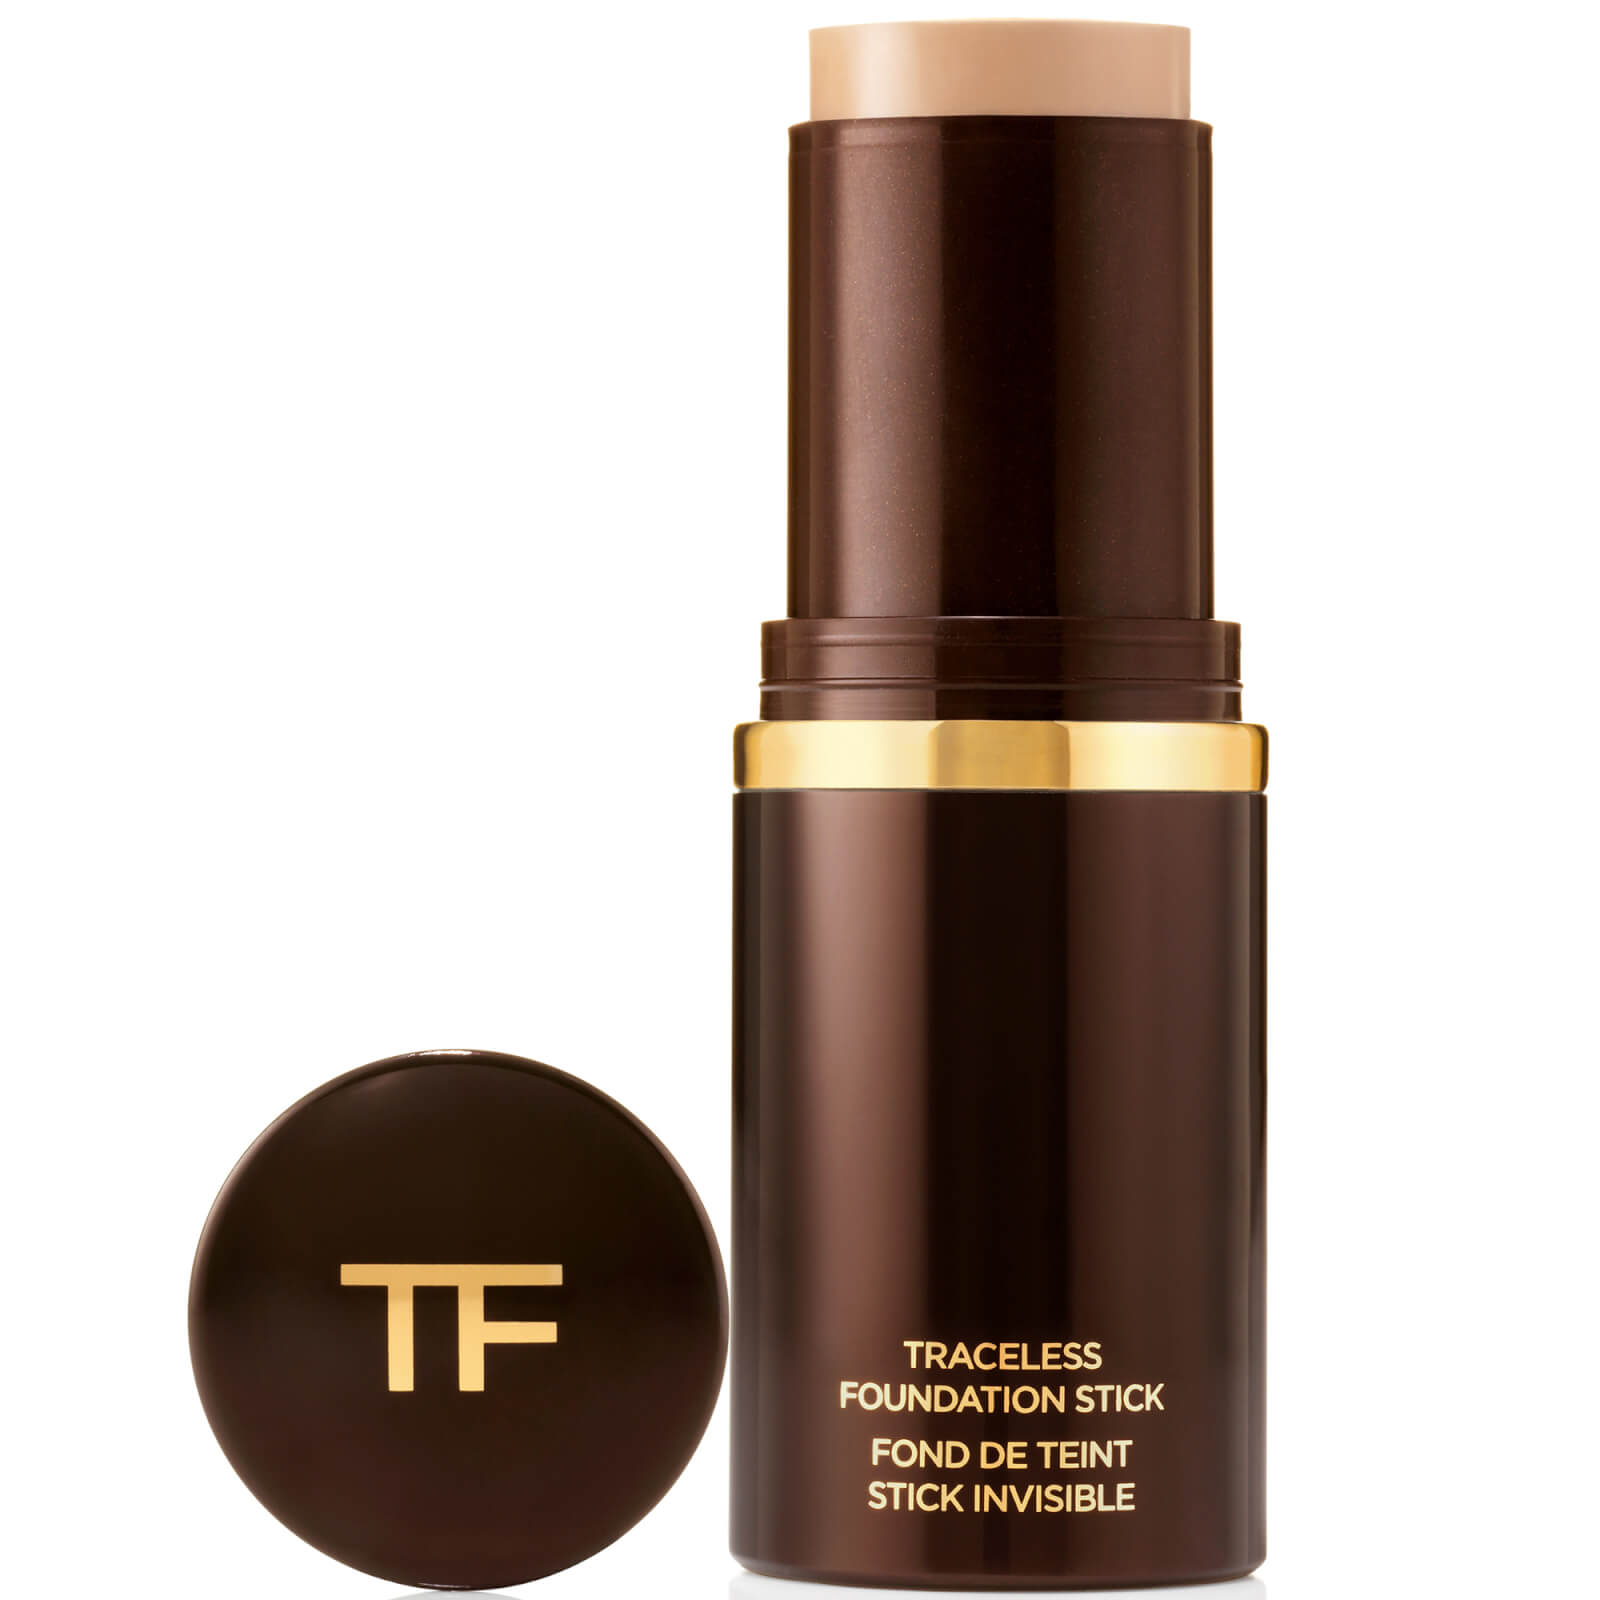 Photos - Foundation & Concealer Tom Ford Traceless Foundation Stick 15g  - 0.0 Pearl T0TJ4 (Various Shades)